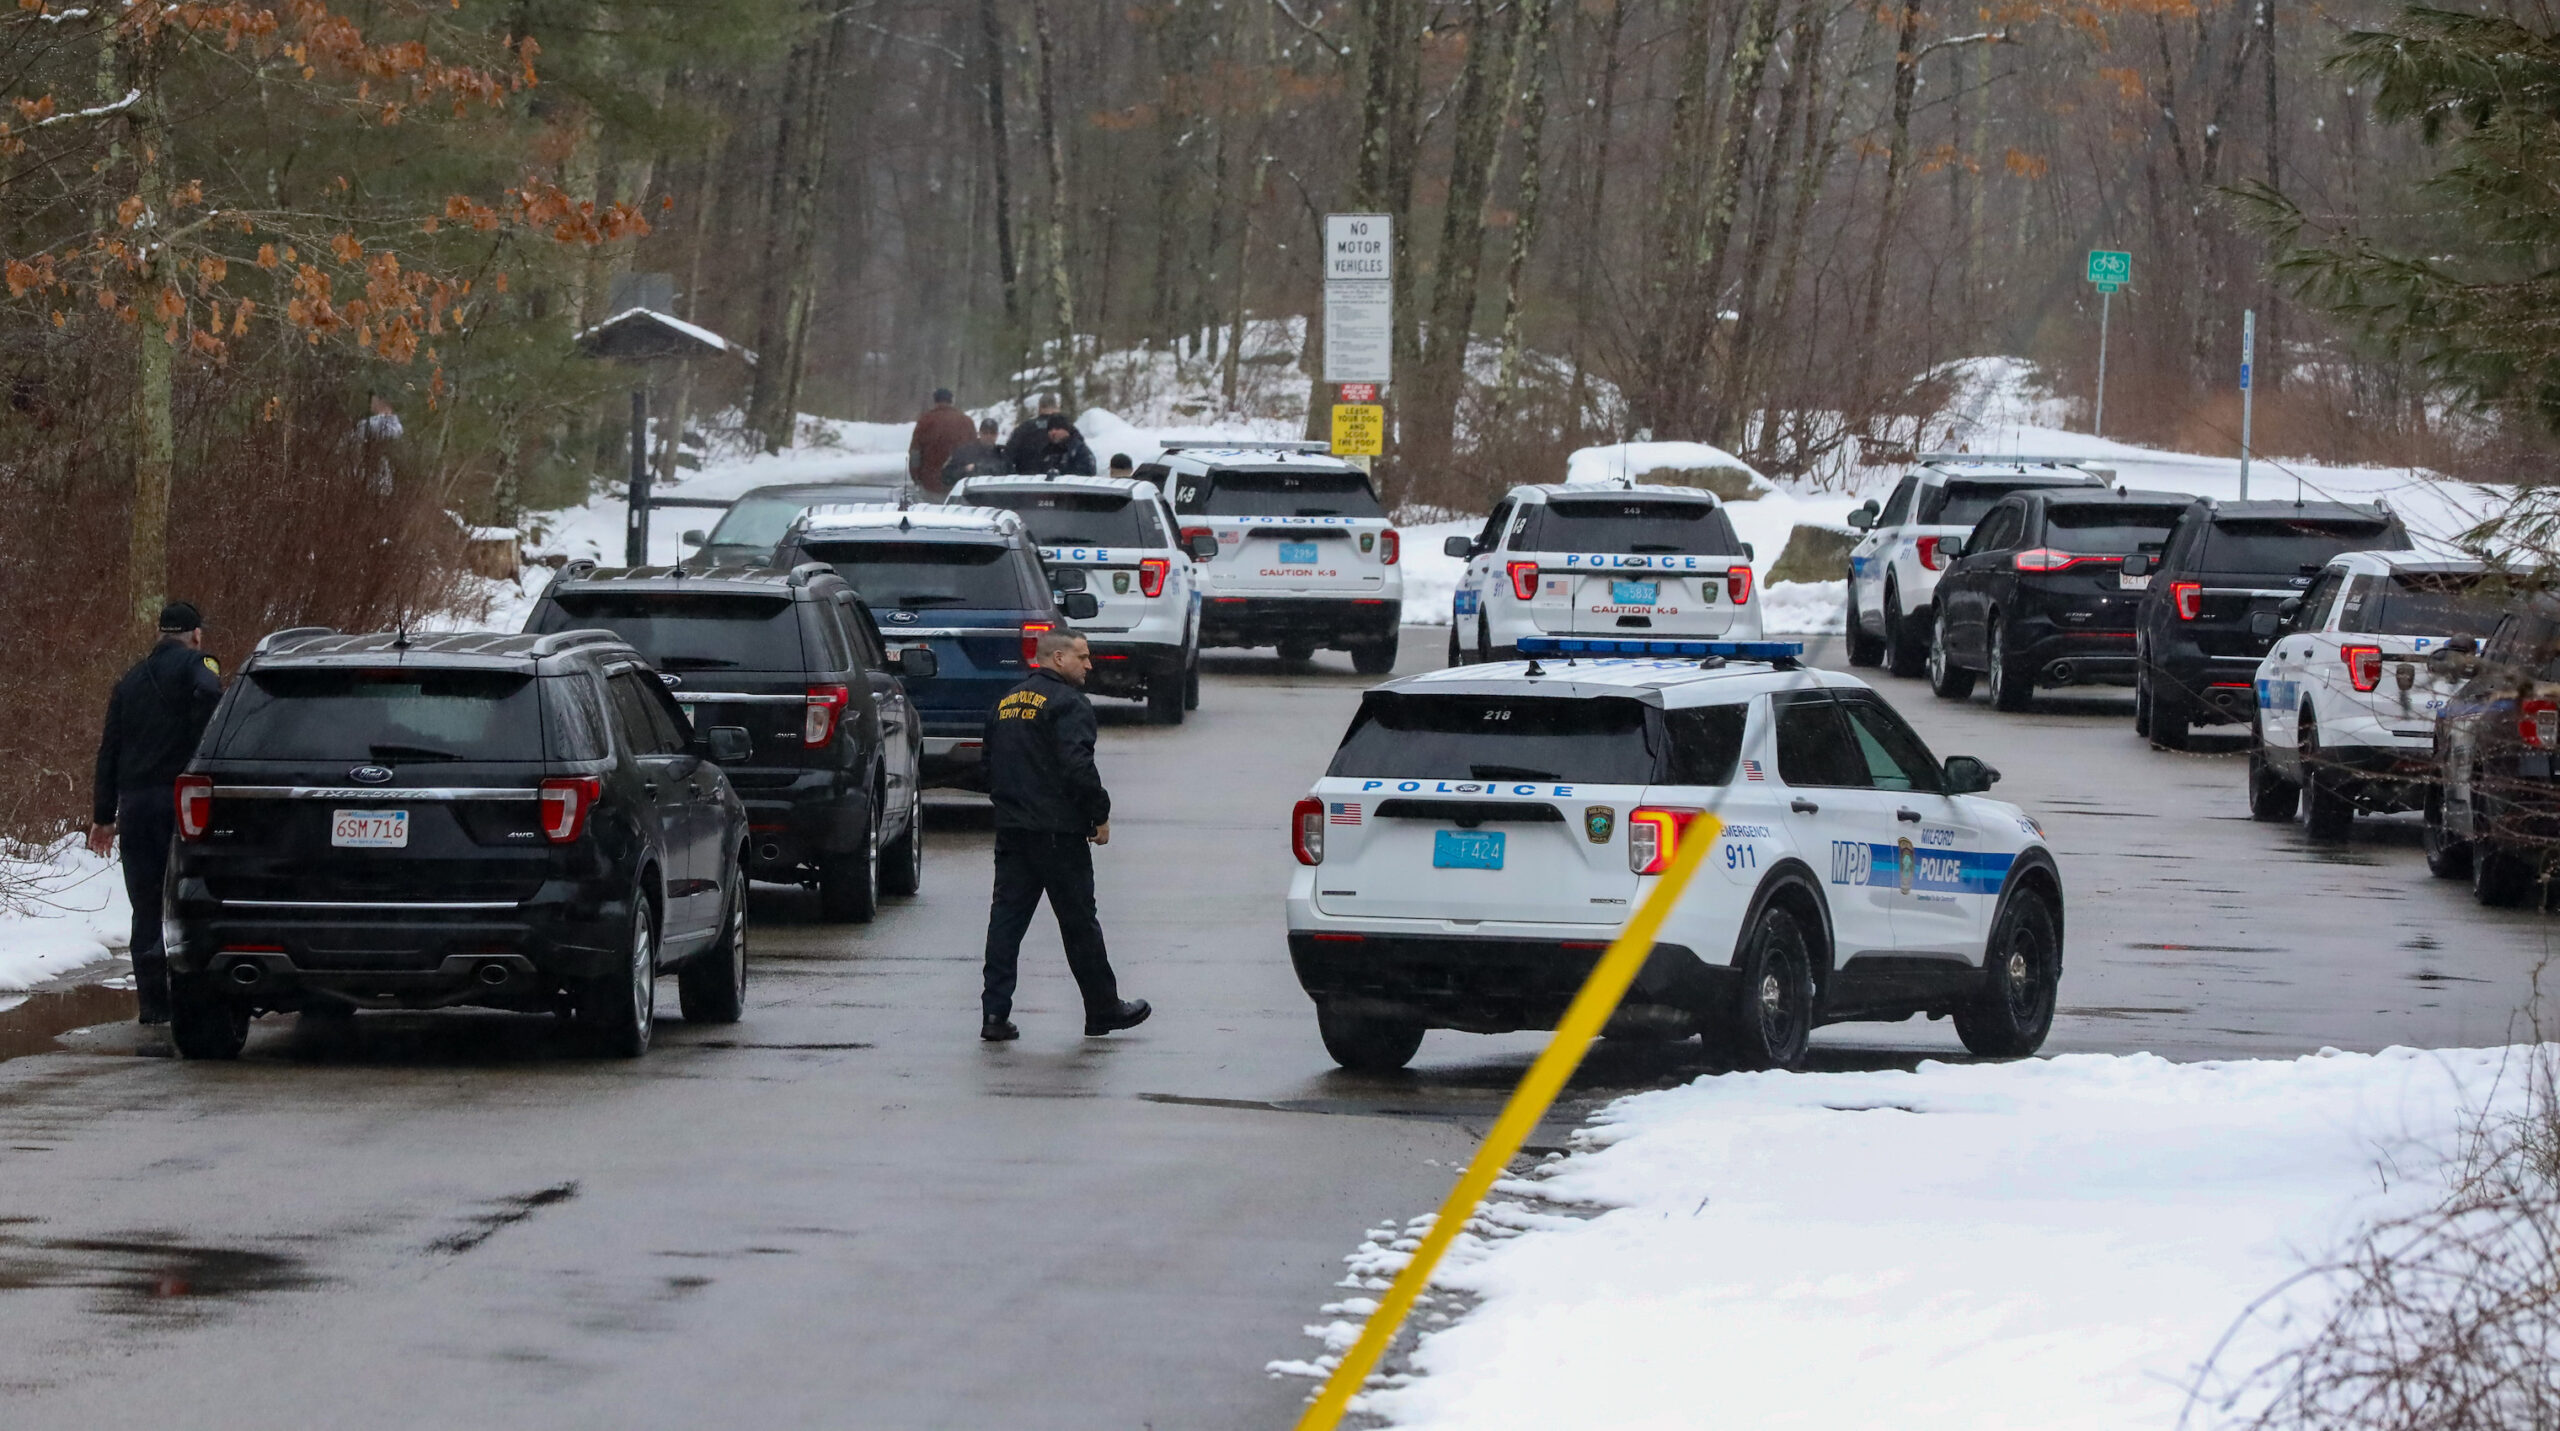 Update: Missing 19-year-old Hopkinton resident found dead